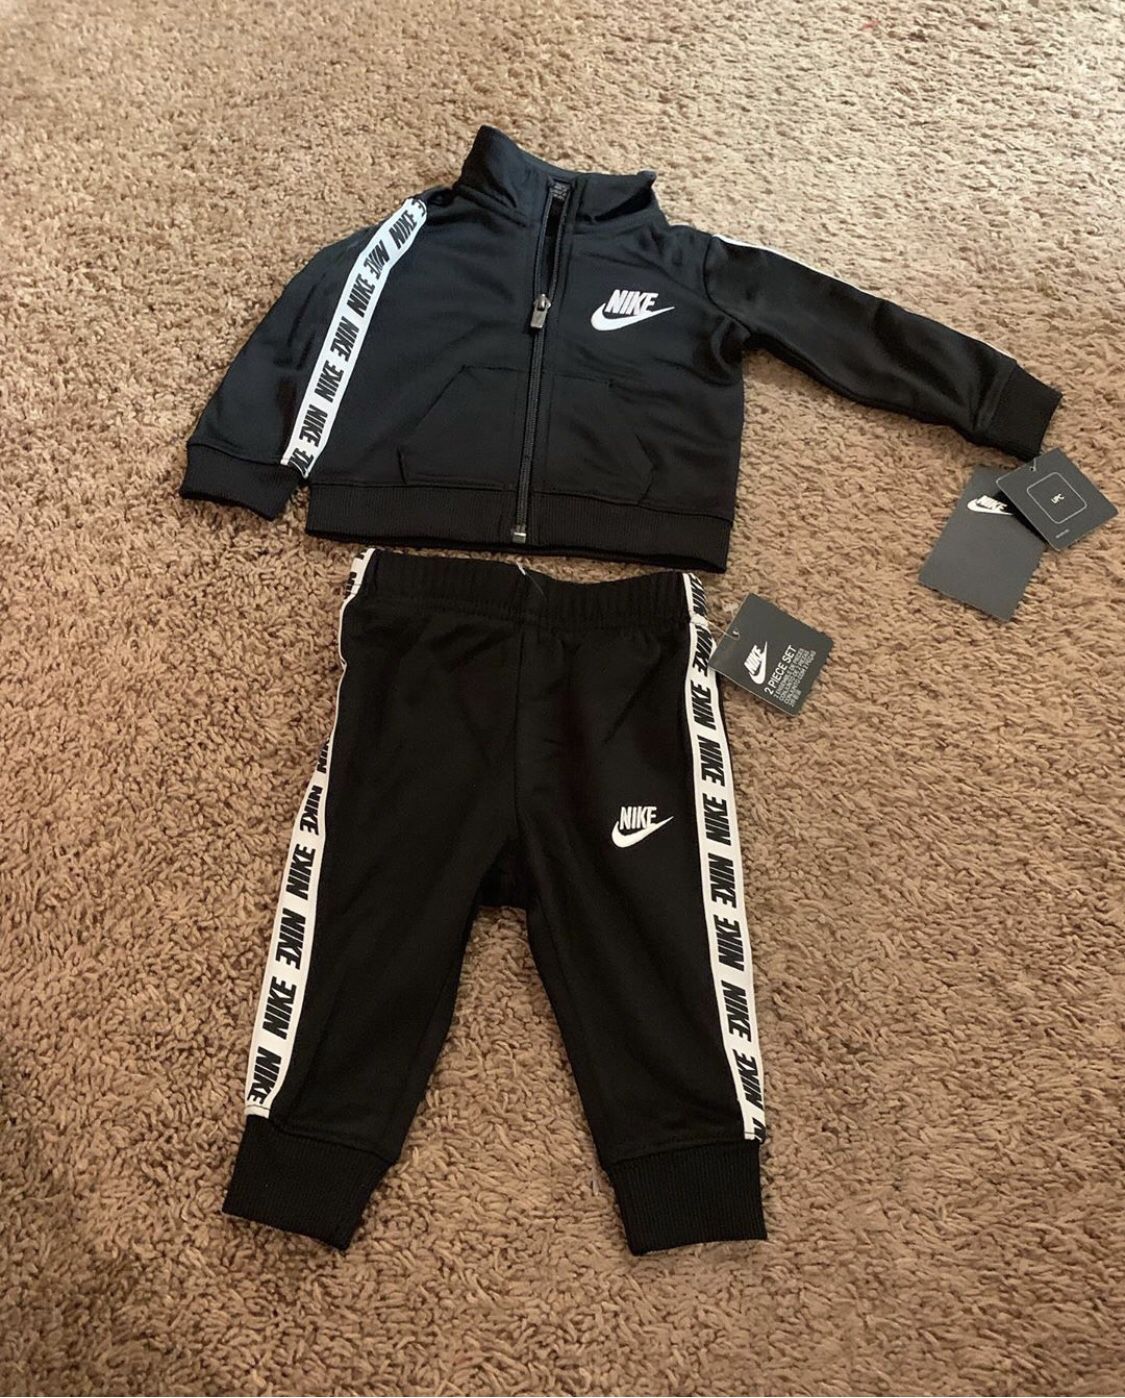 Unisex Nike Outfit 6 Months